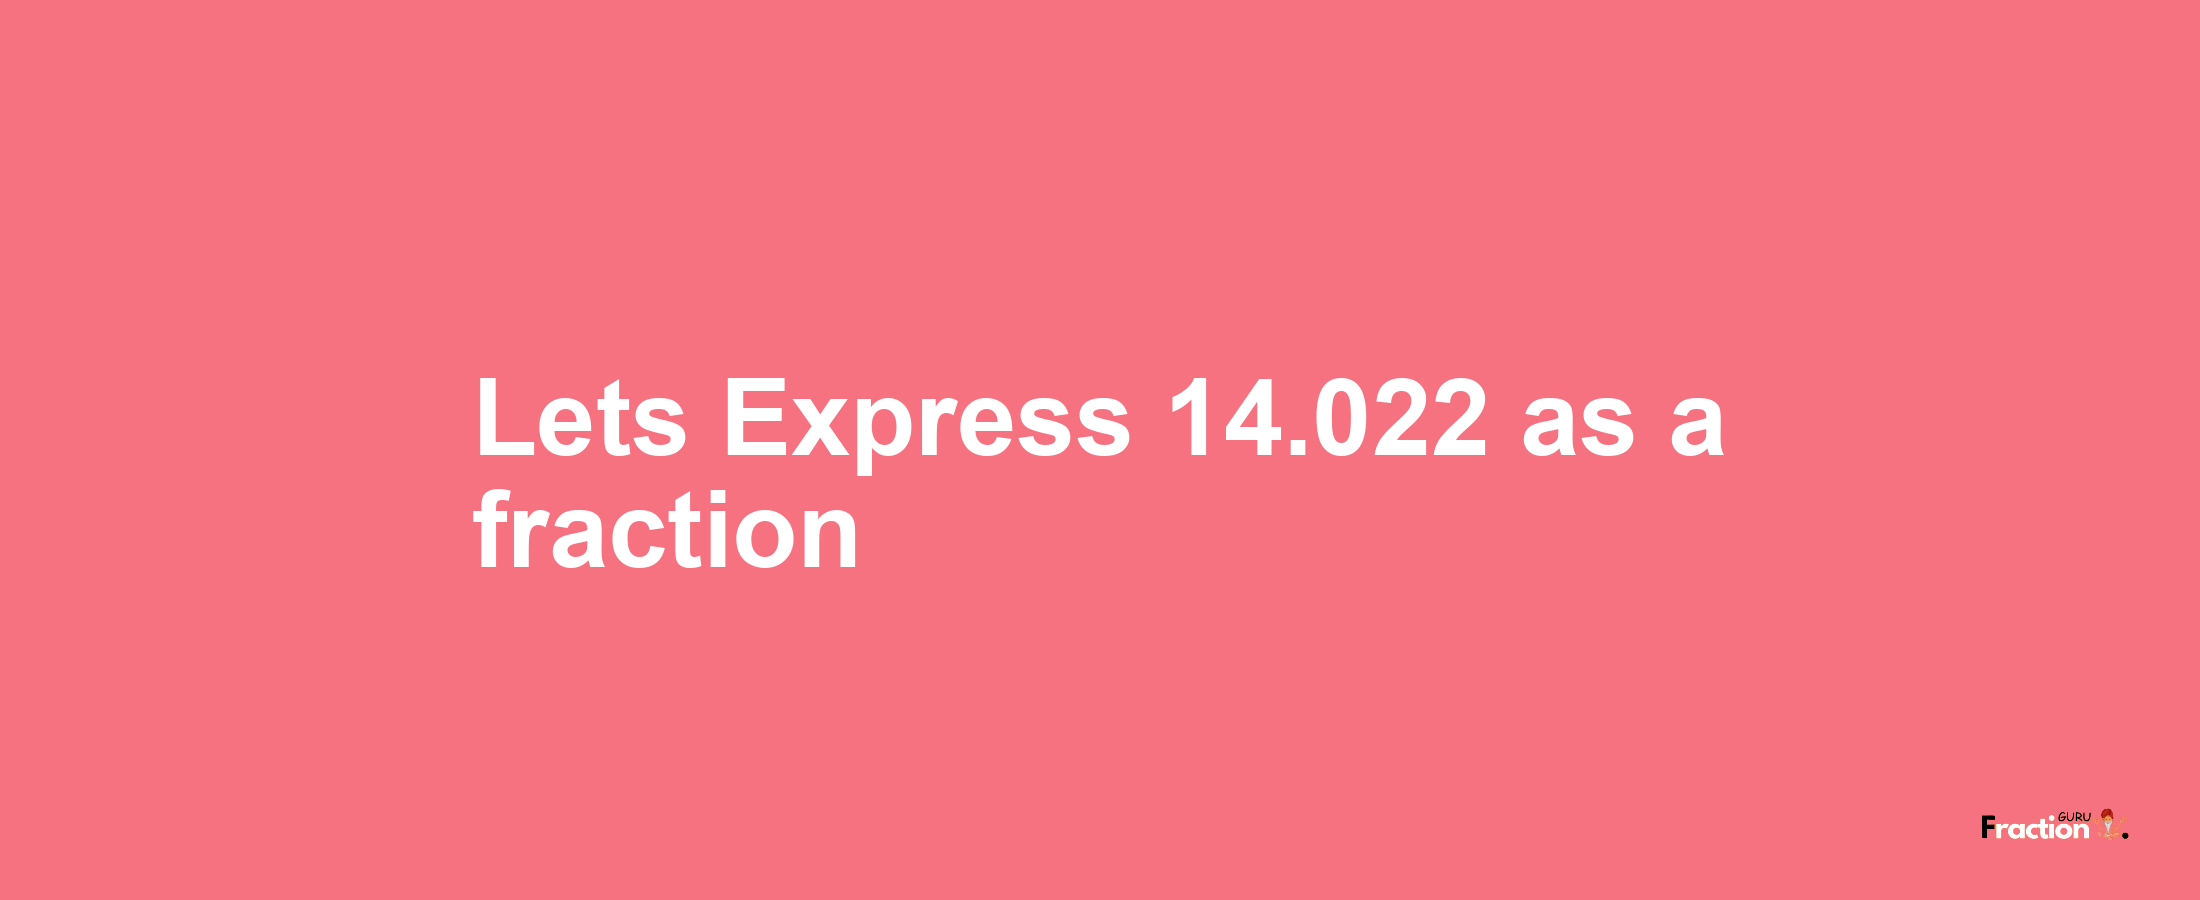 Lets Express 14.022 as afraction